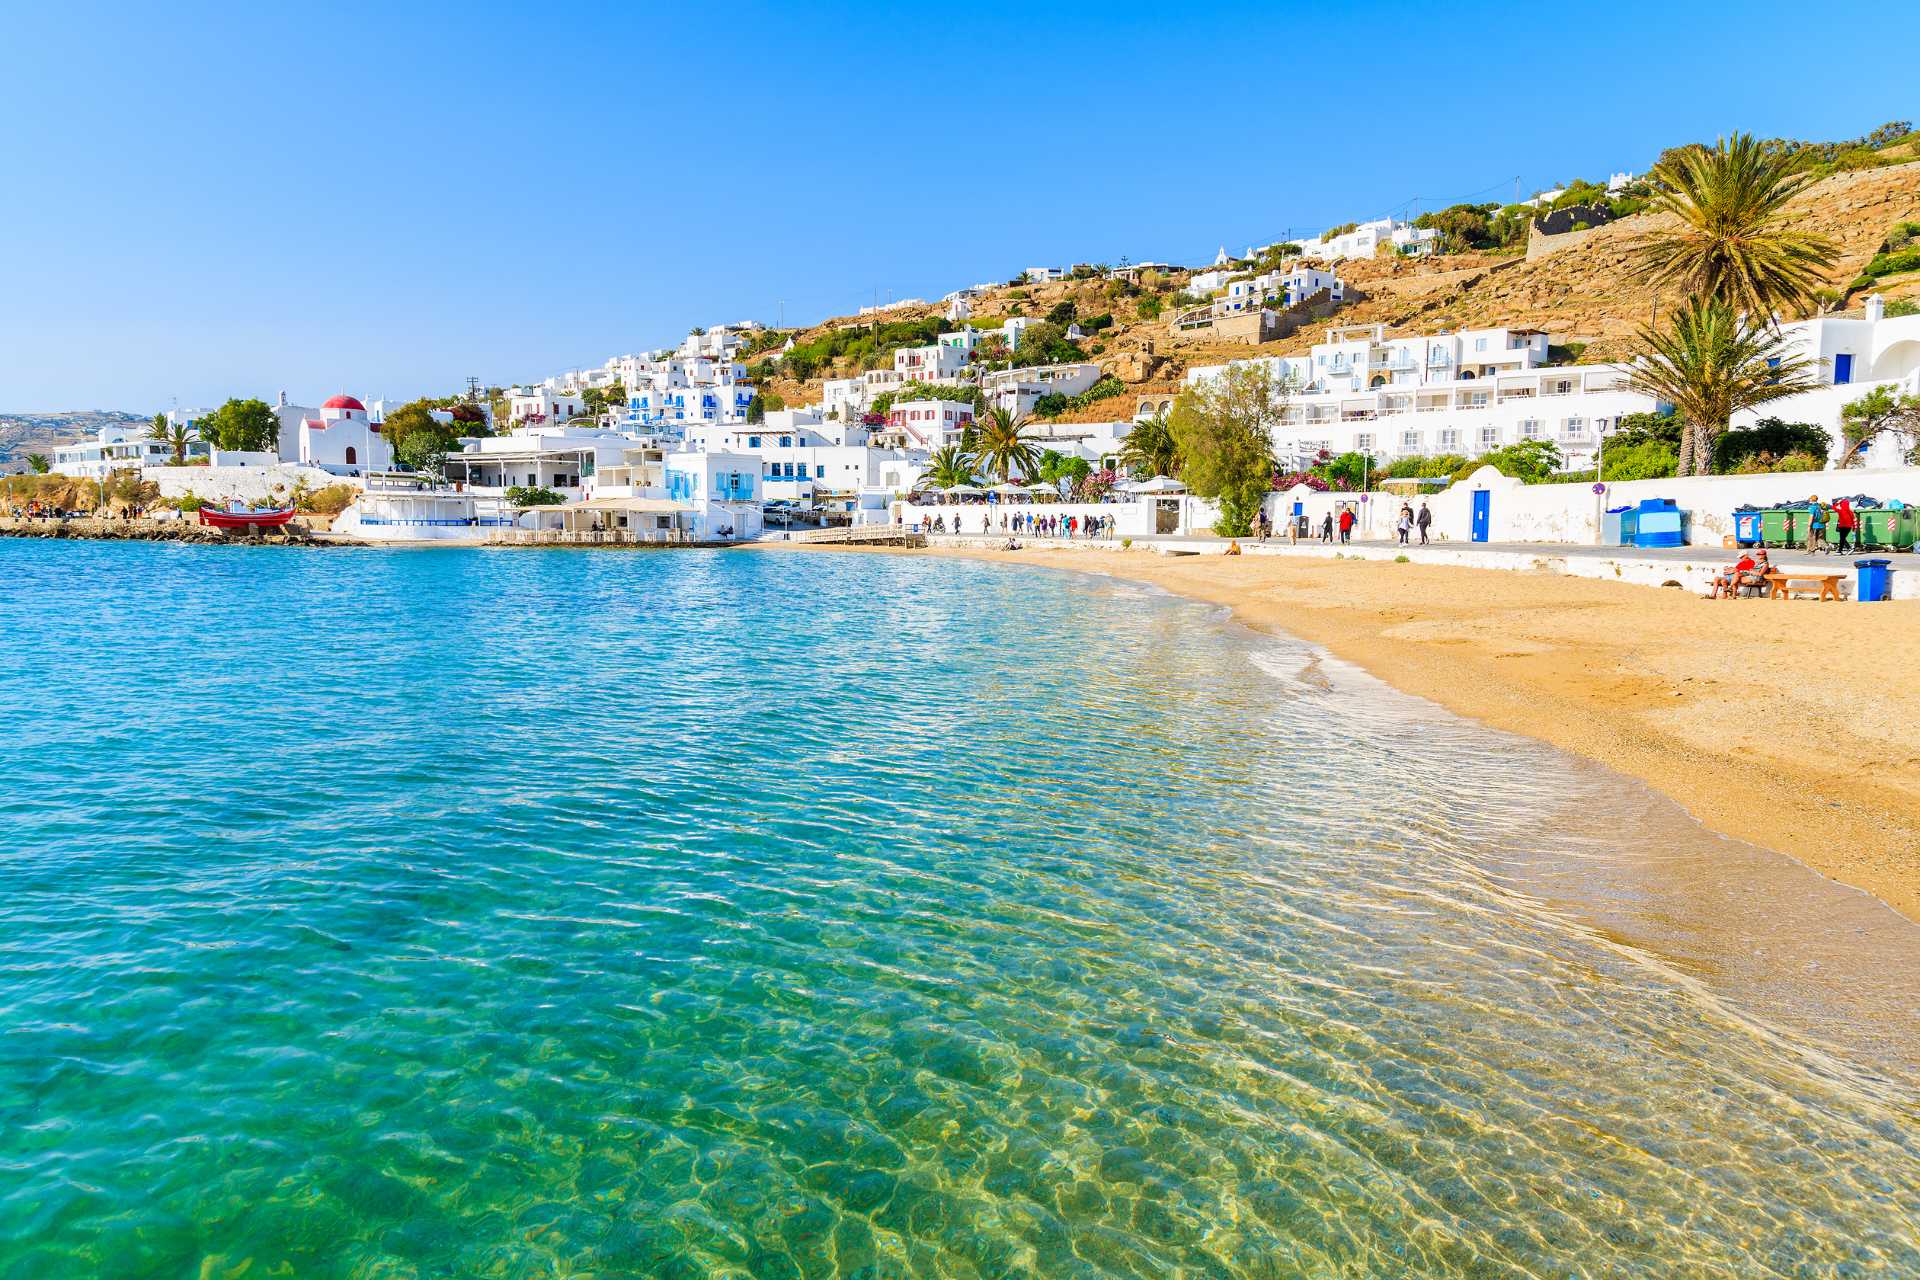 Mykonos is Greece's most famous cosmopolitan island, a whitewashed paradise in the heart of the Cyclades